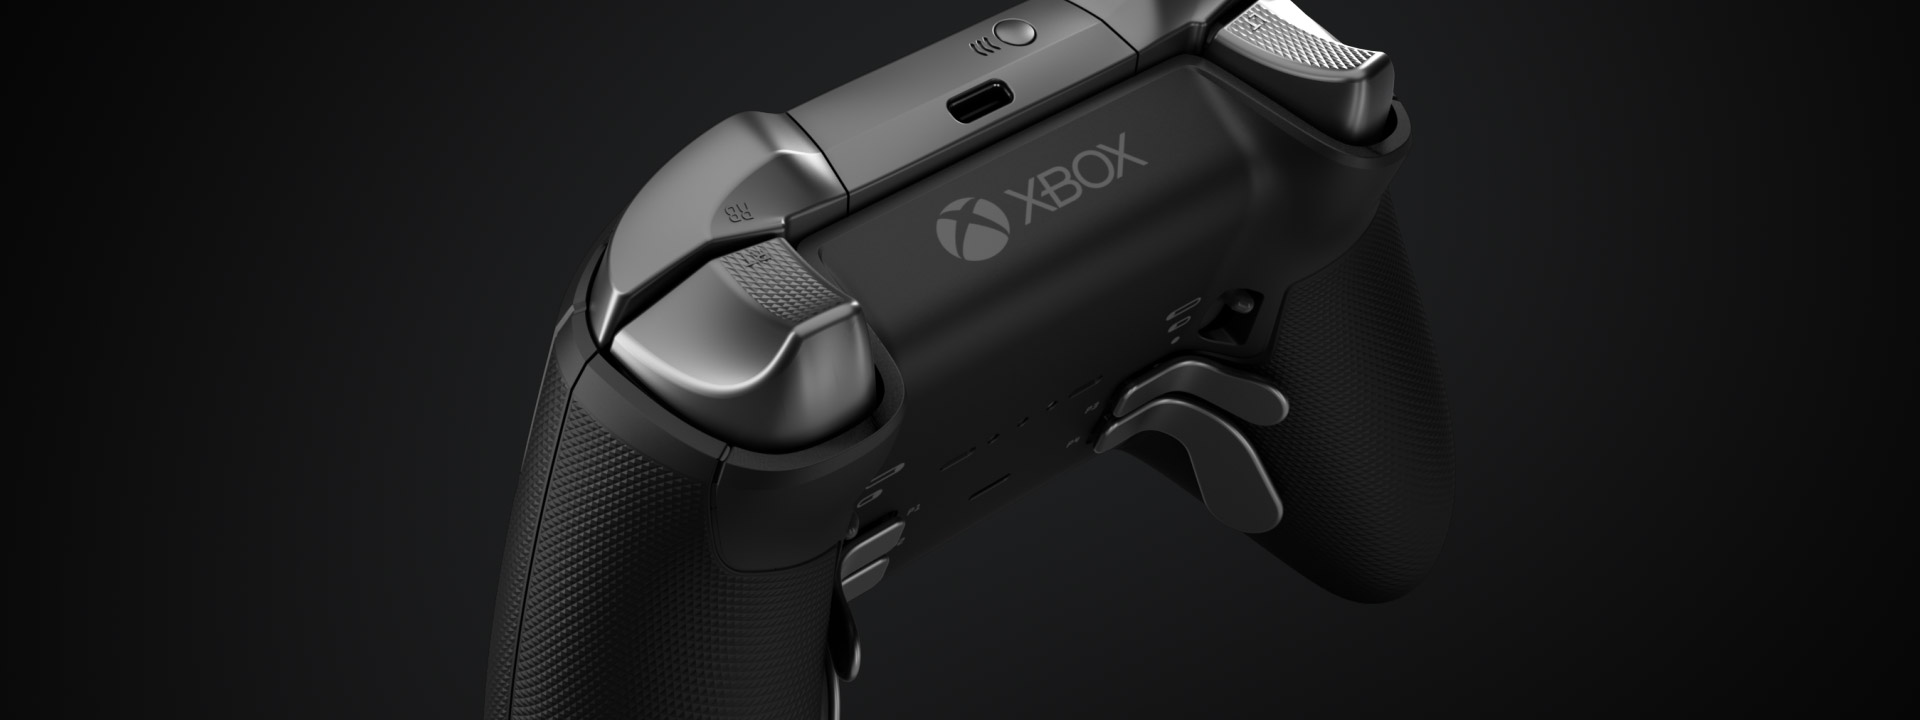 xbox one pro controller series 2